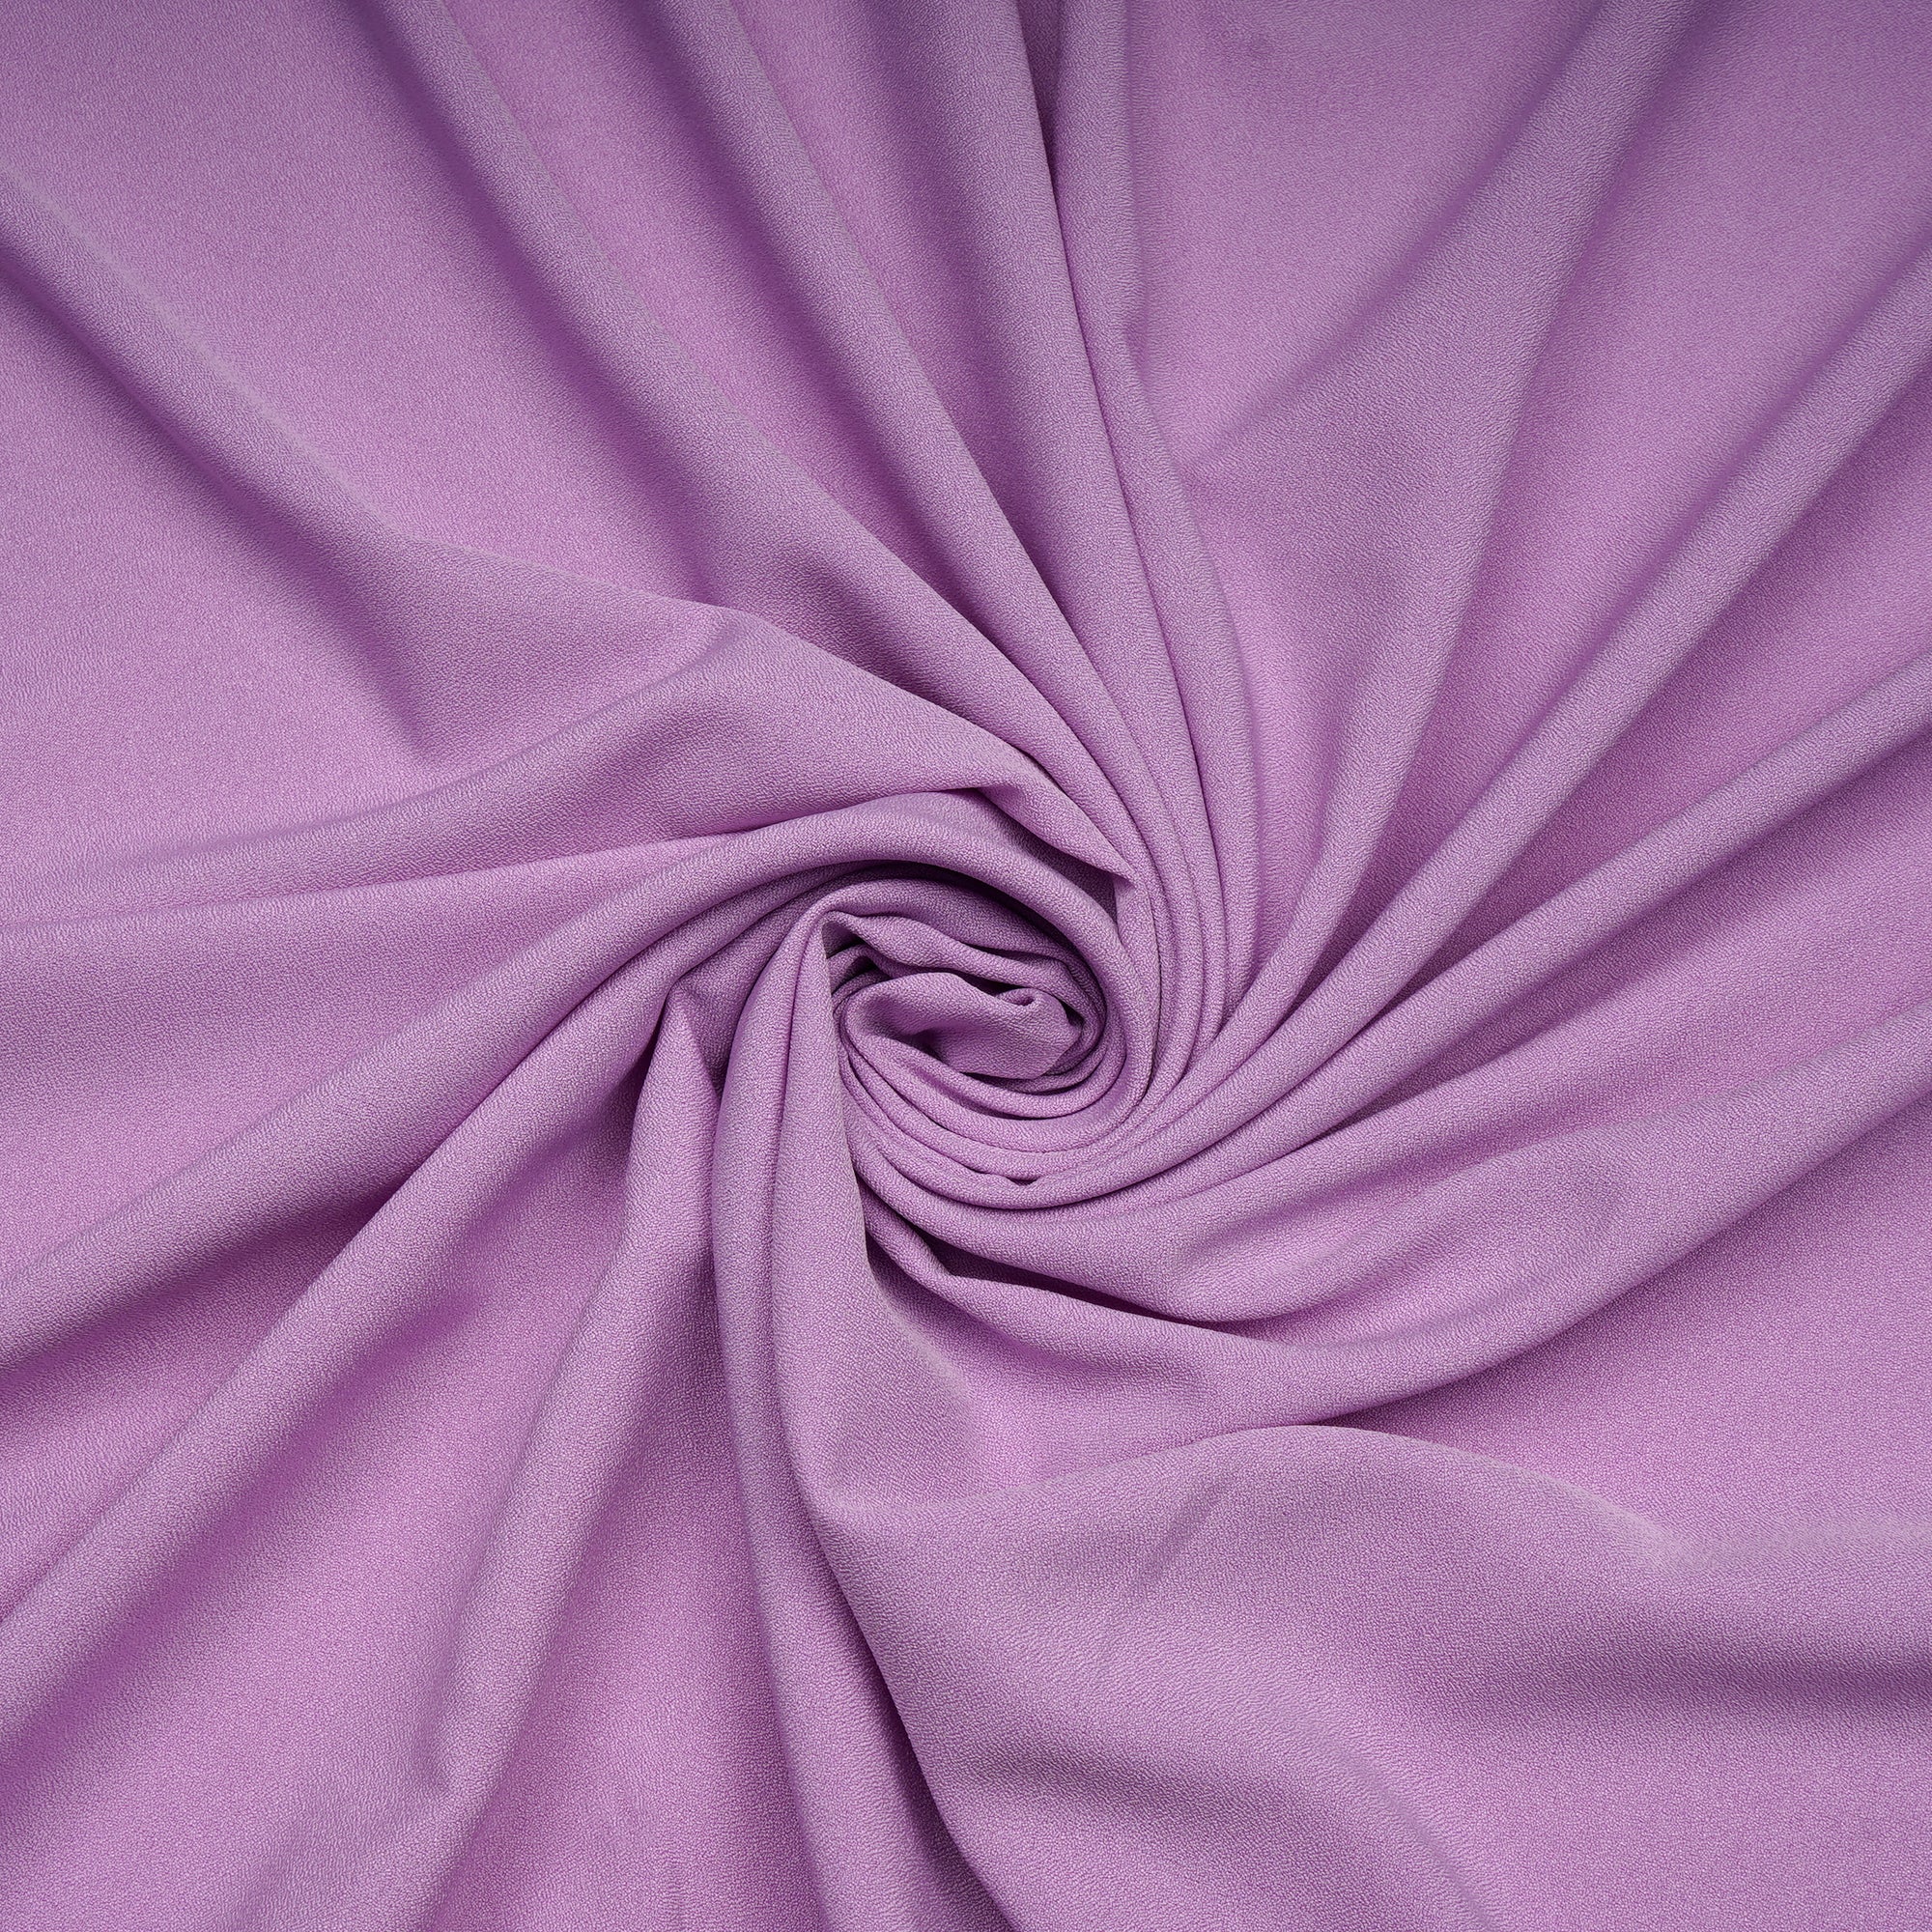 Lavender Solid Dyed Imported Moss Crepe Fabric (60" Width)